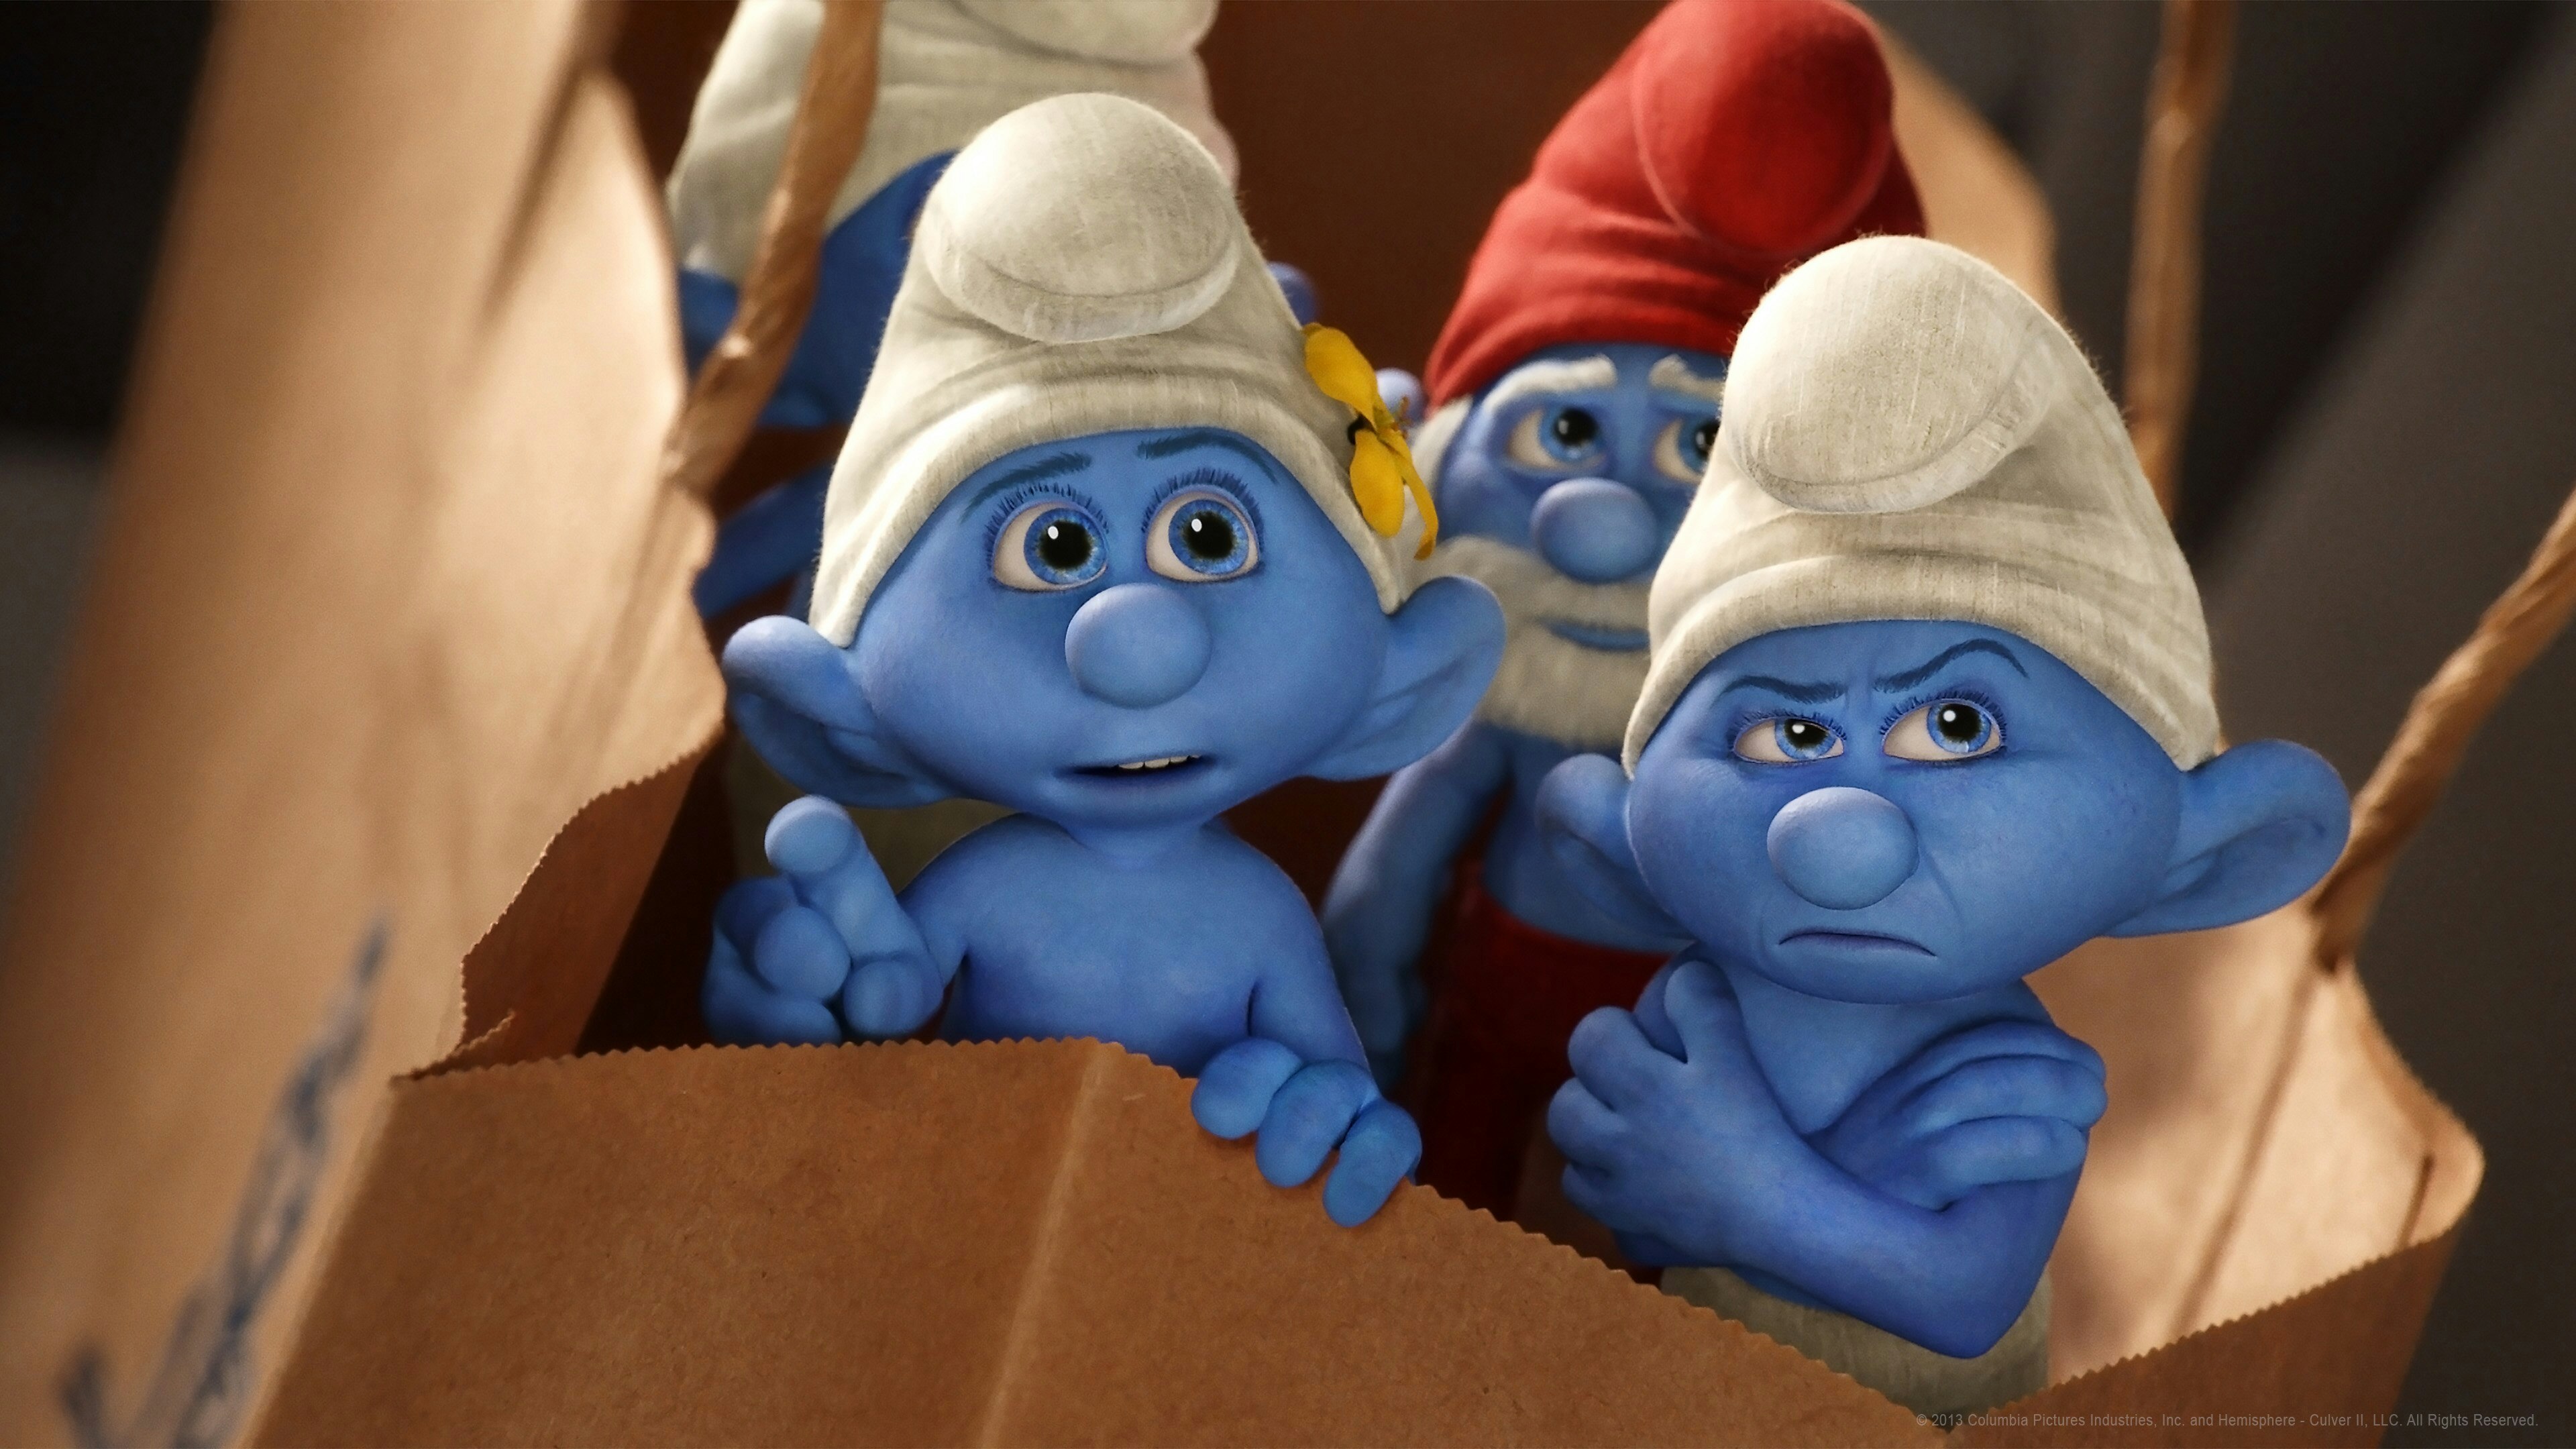 Kidscreen » Archive » FAO Schwarz goes blue with new Smurfs promotion